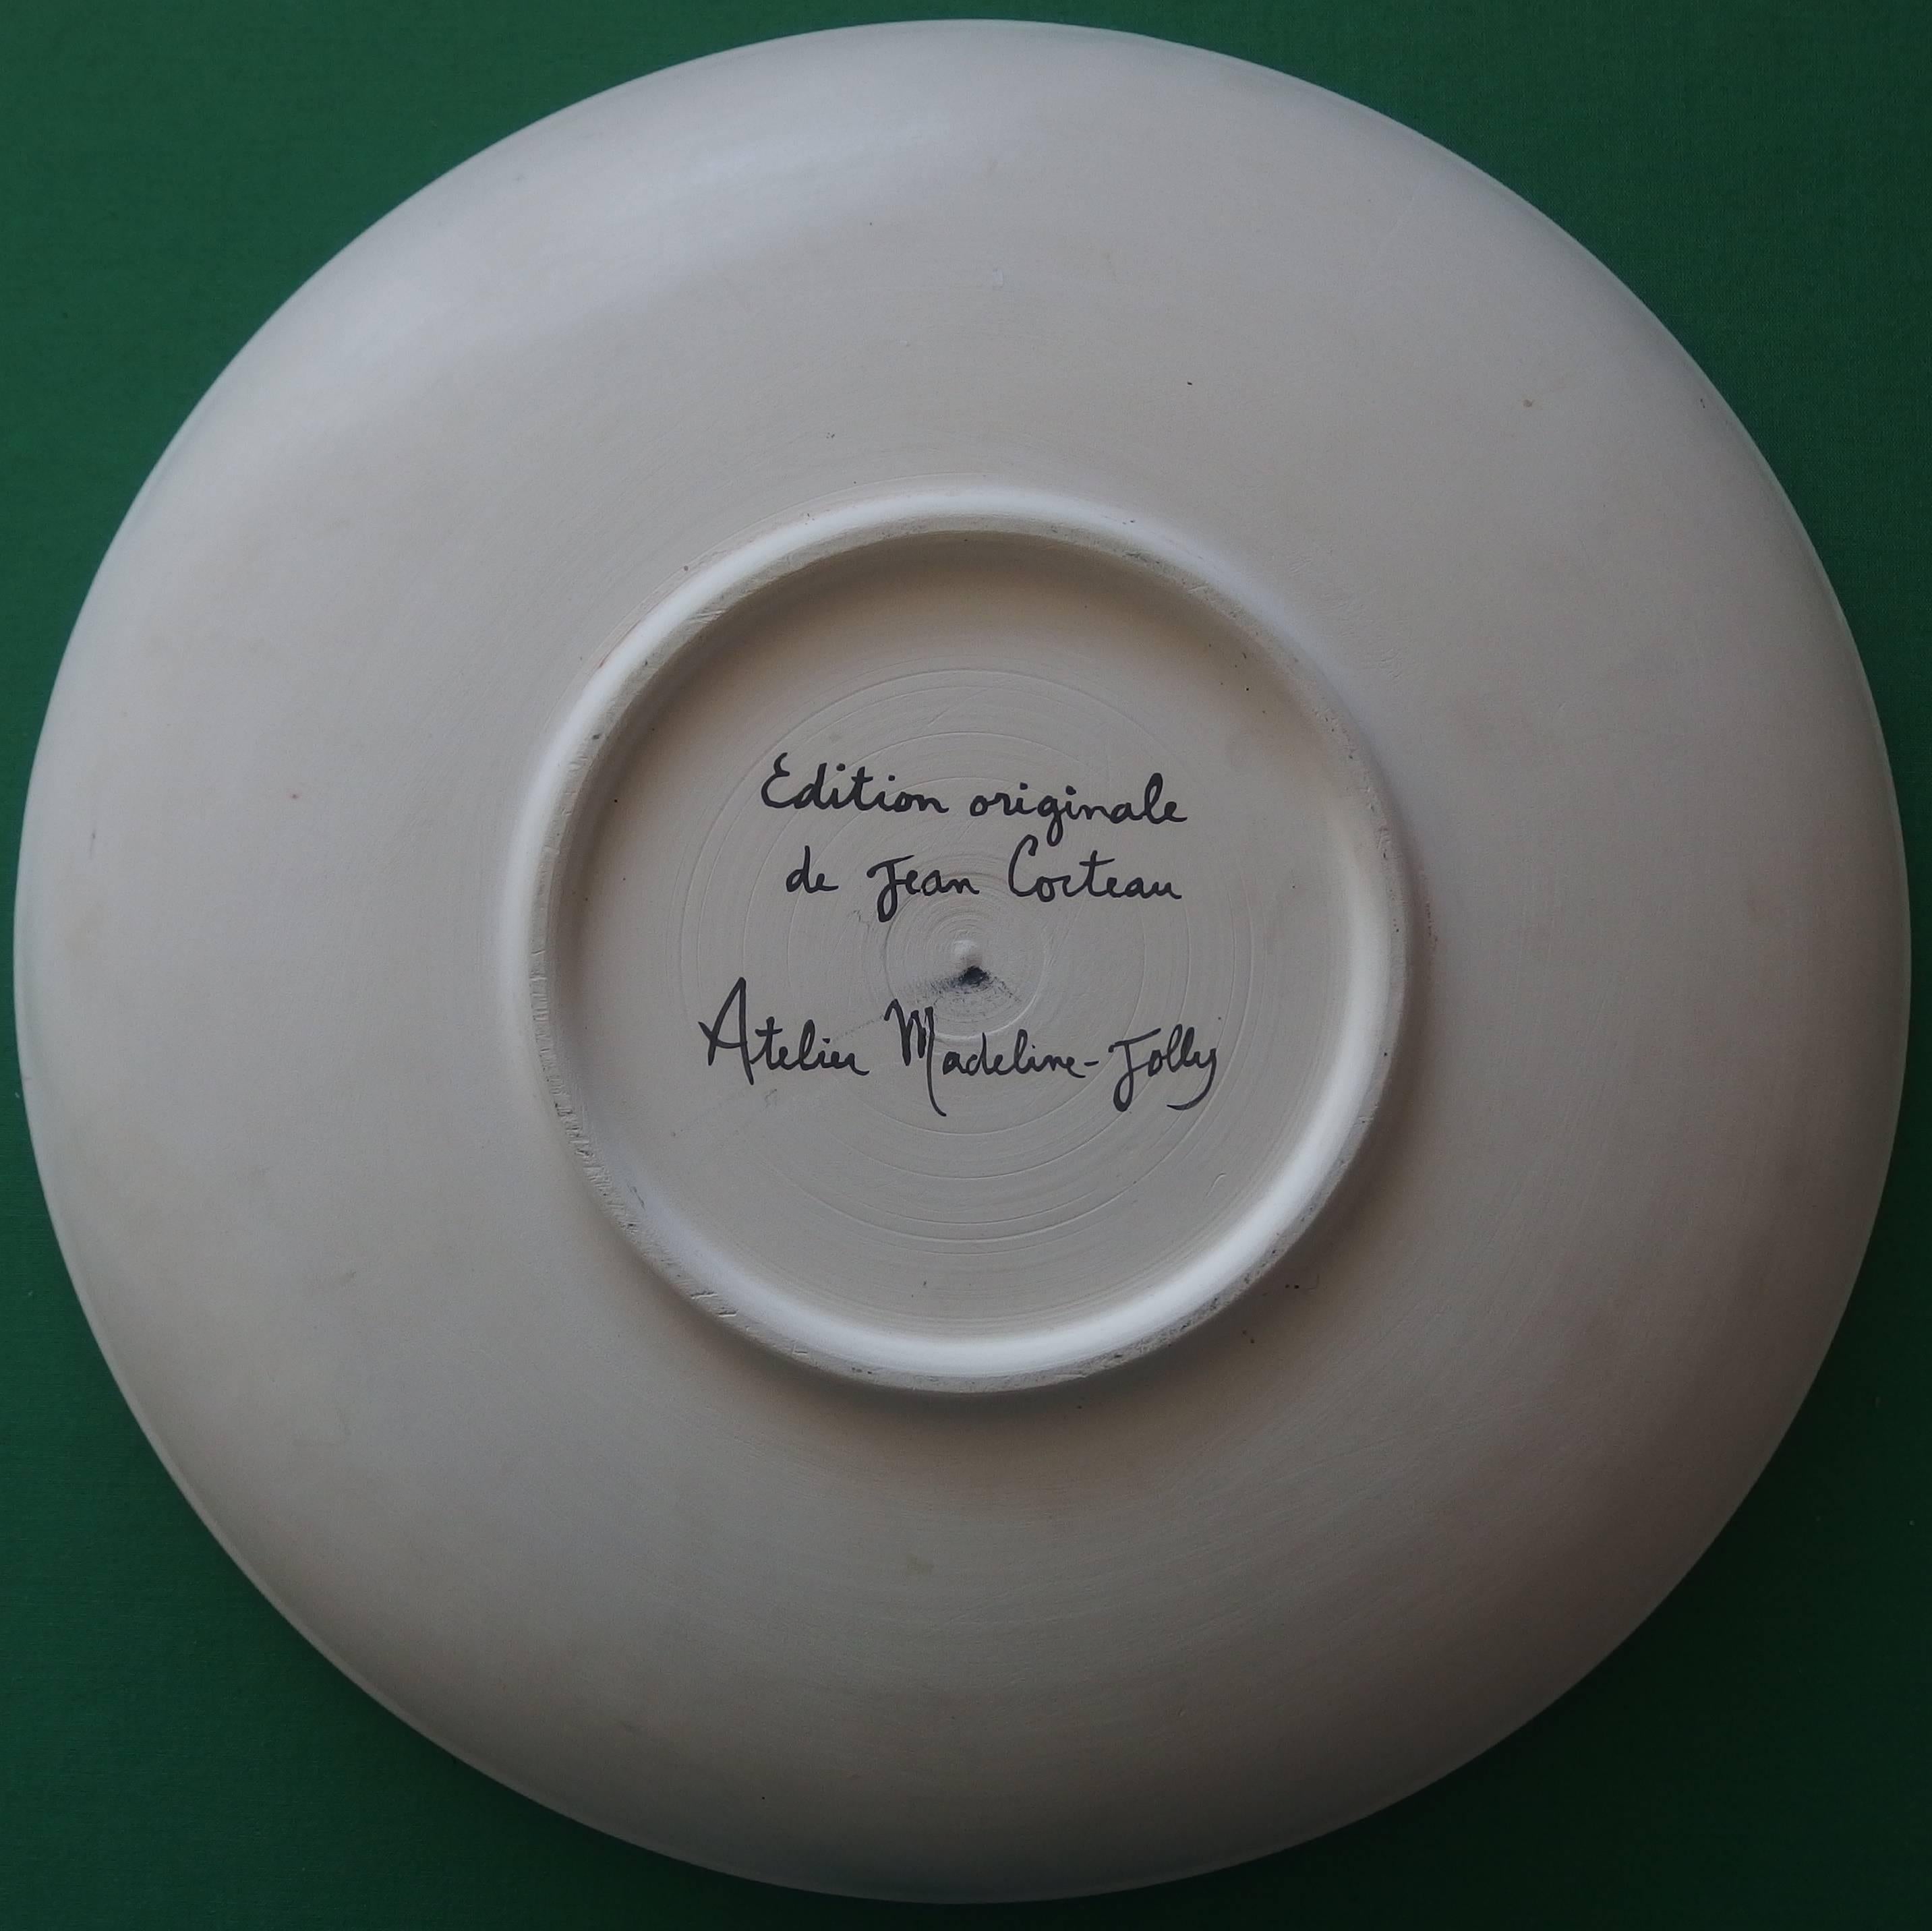 Faun Eating Grappes - Tall original ceramic dish - Signed, Ltd 15 copies - Sculpture by Jean Cocteau